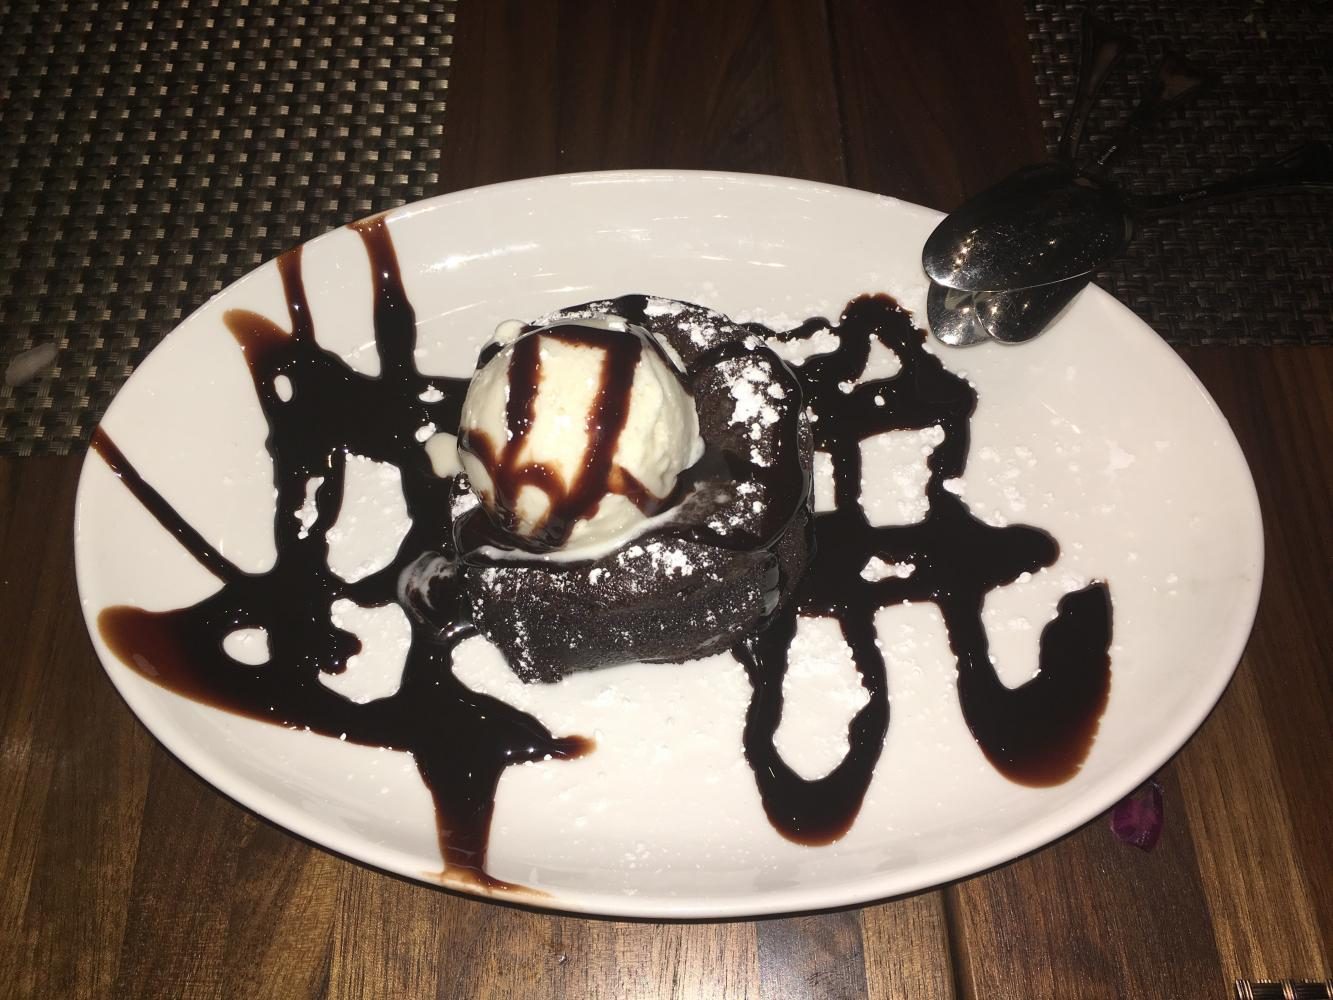 The+Chocolate+Lava+Cake+is+served+with+ice+cream+and+covered+in+fudge+sauce.+Although+it+has+an+enticing+appearance%2C+the+dish+is+not+the+meals+highlight.+